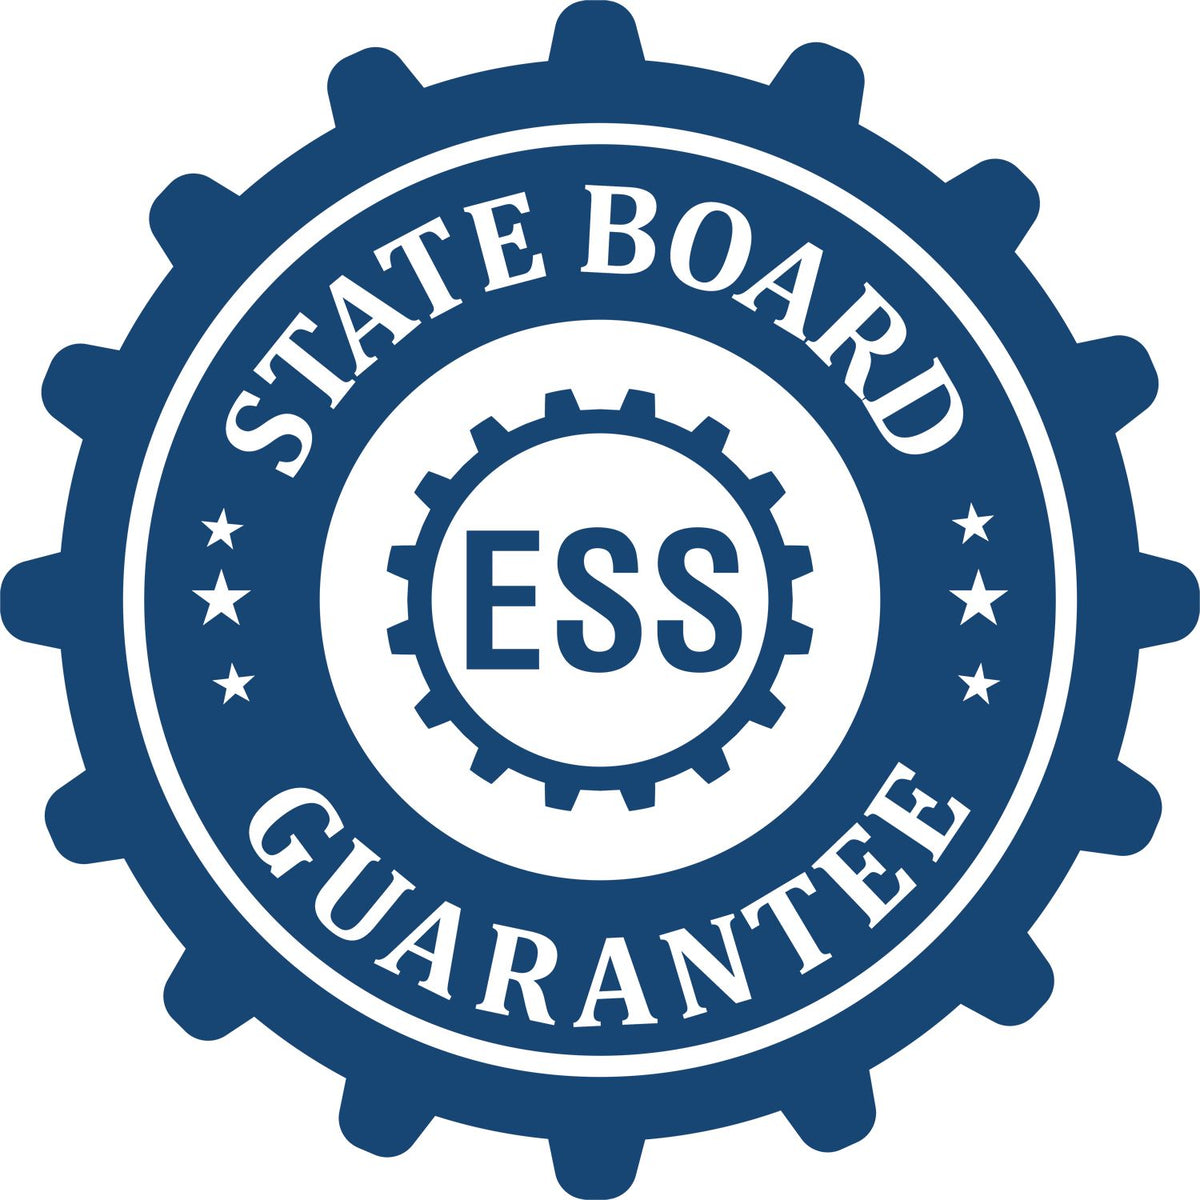 An emblem in a gear shape illustrating a state board guarantee for the New Hampshire Geologist Desk Seal